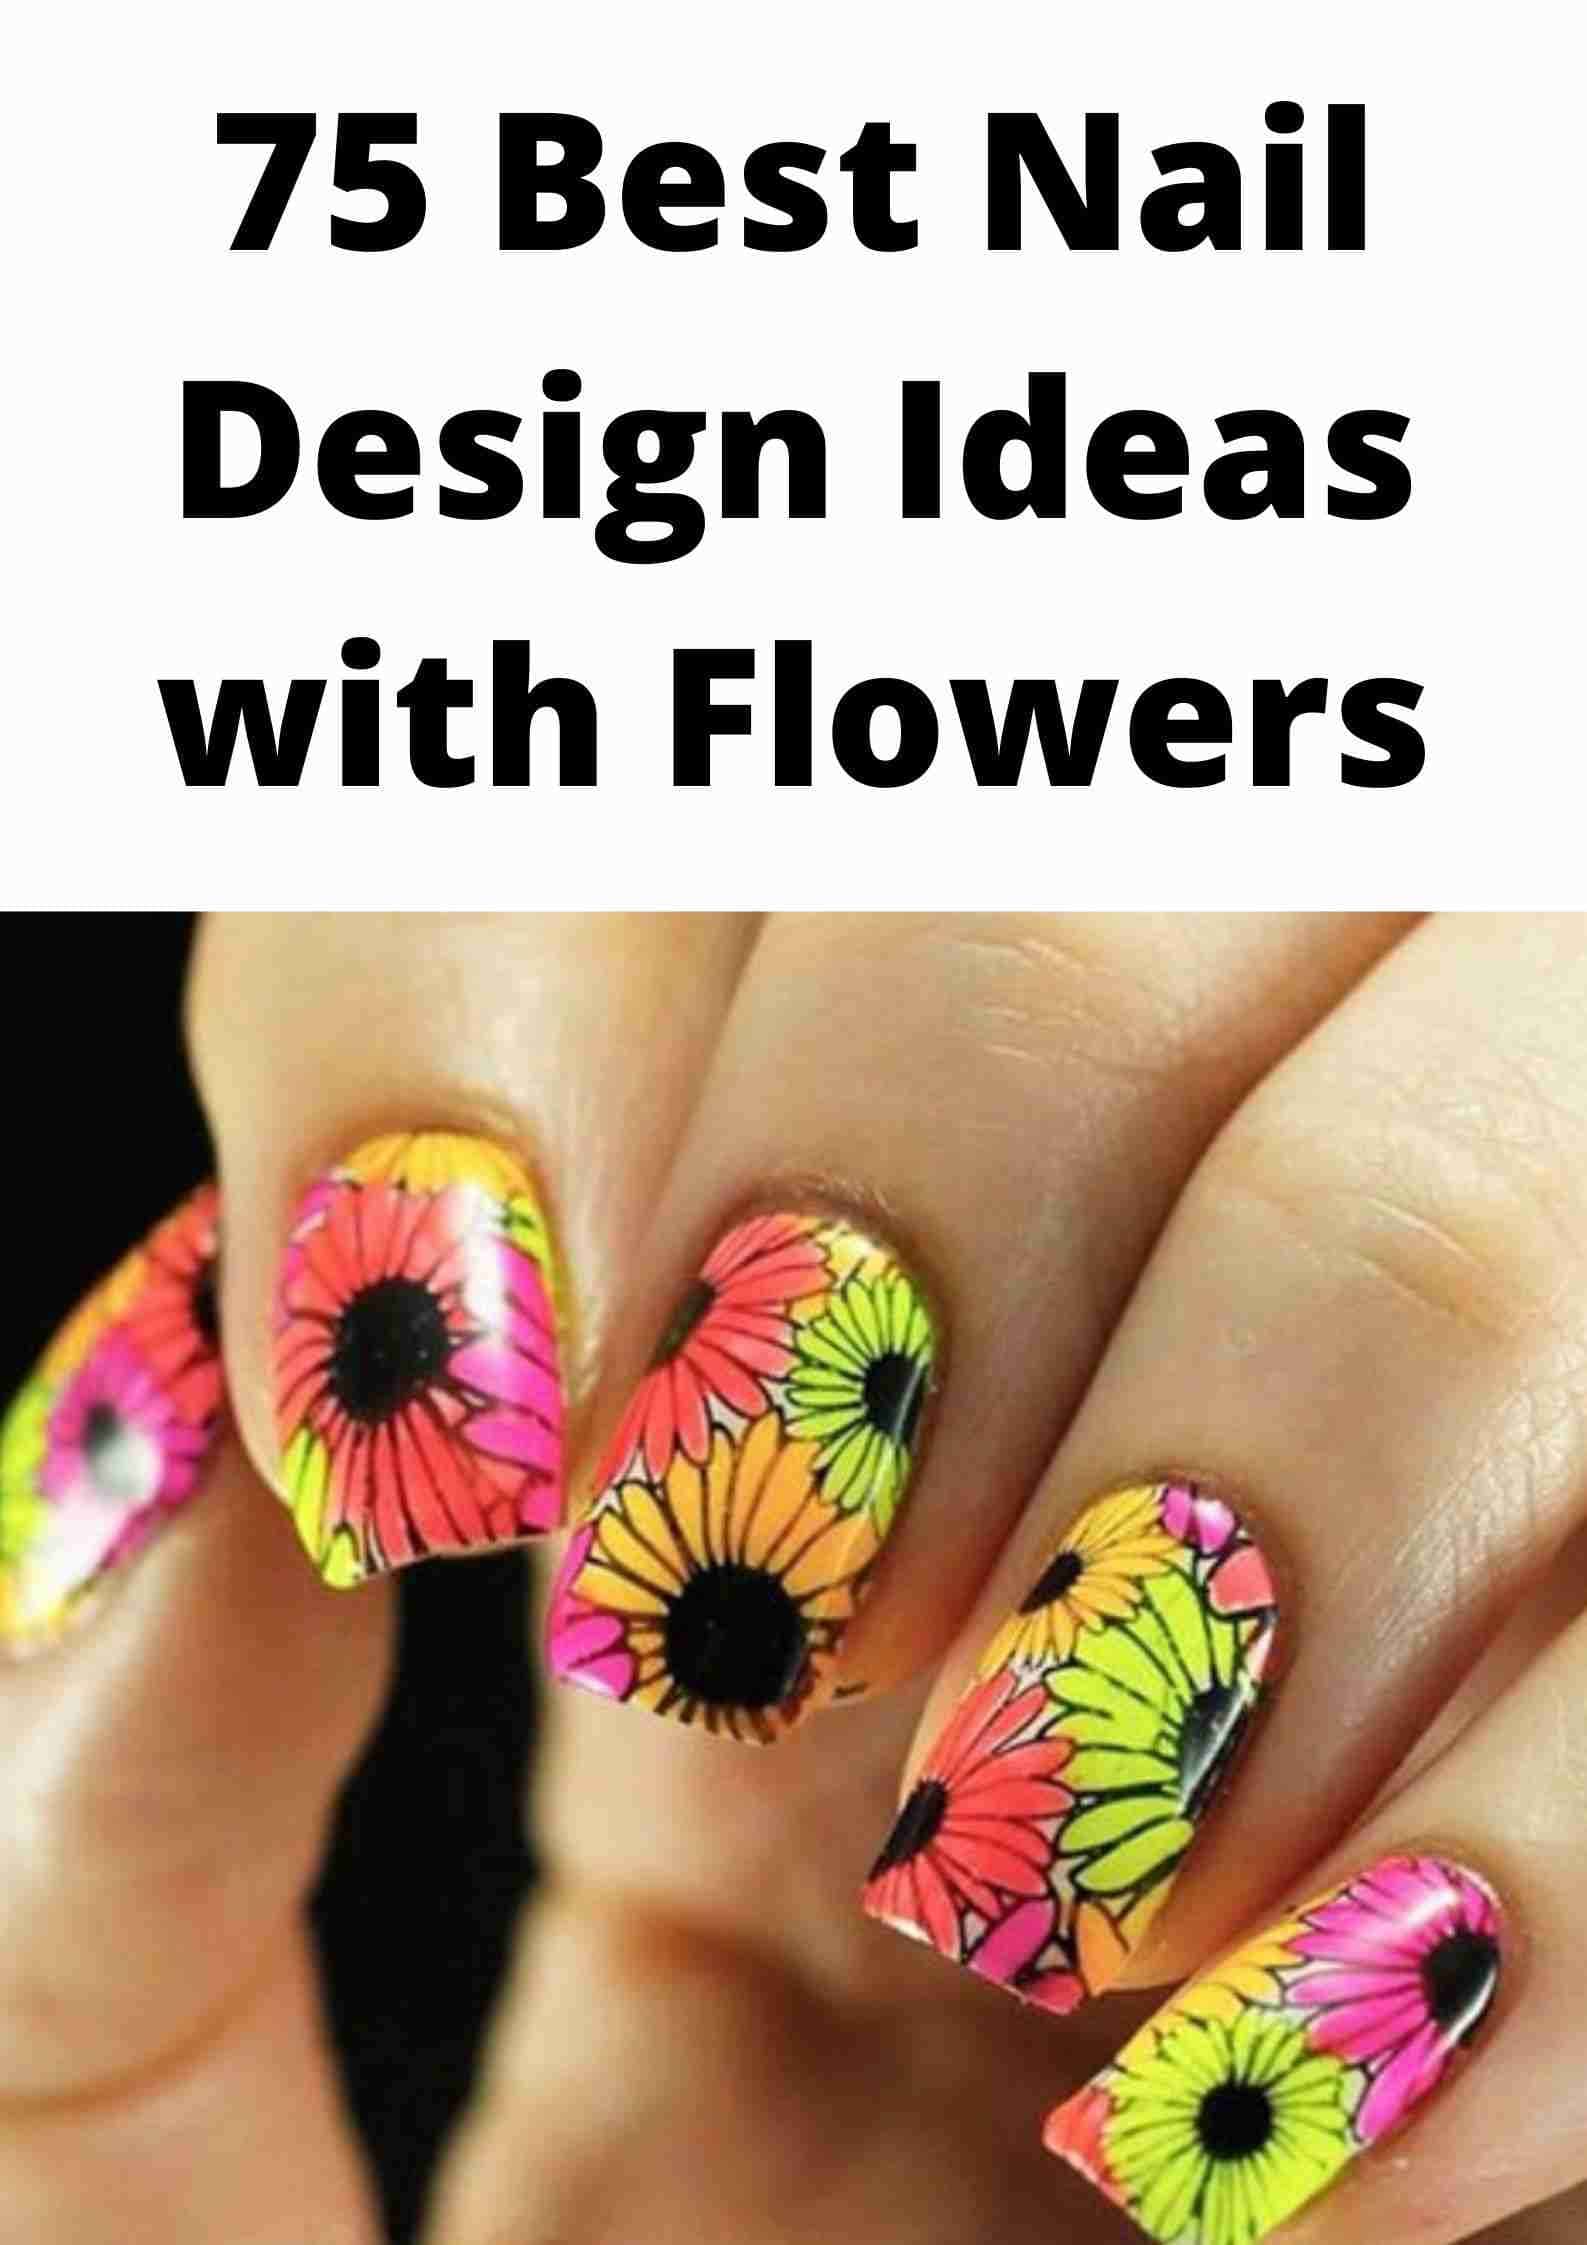 Nail Design with flower